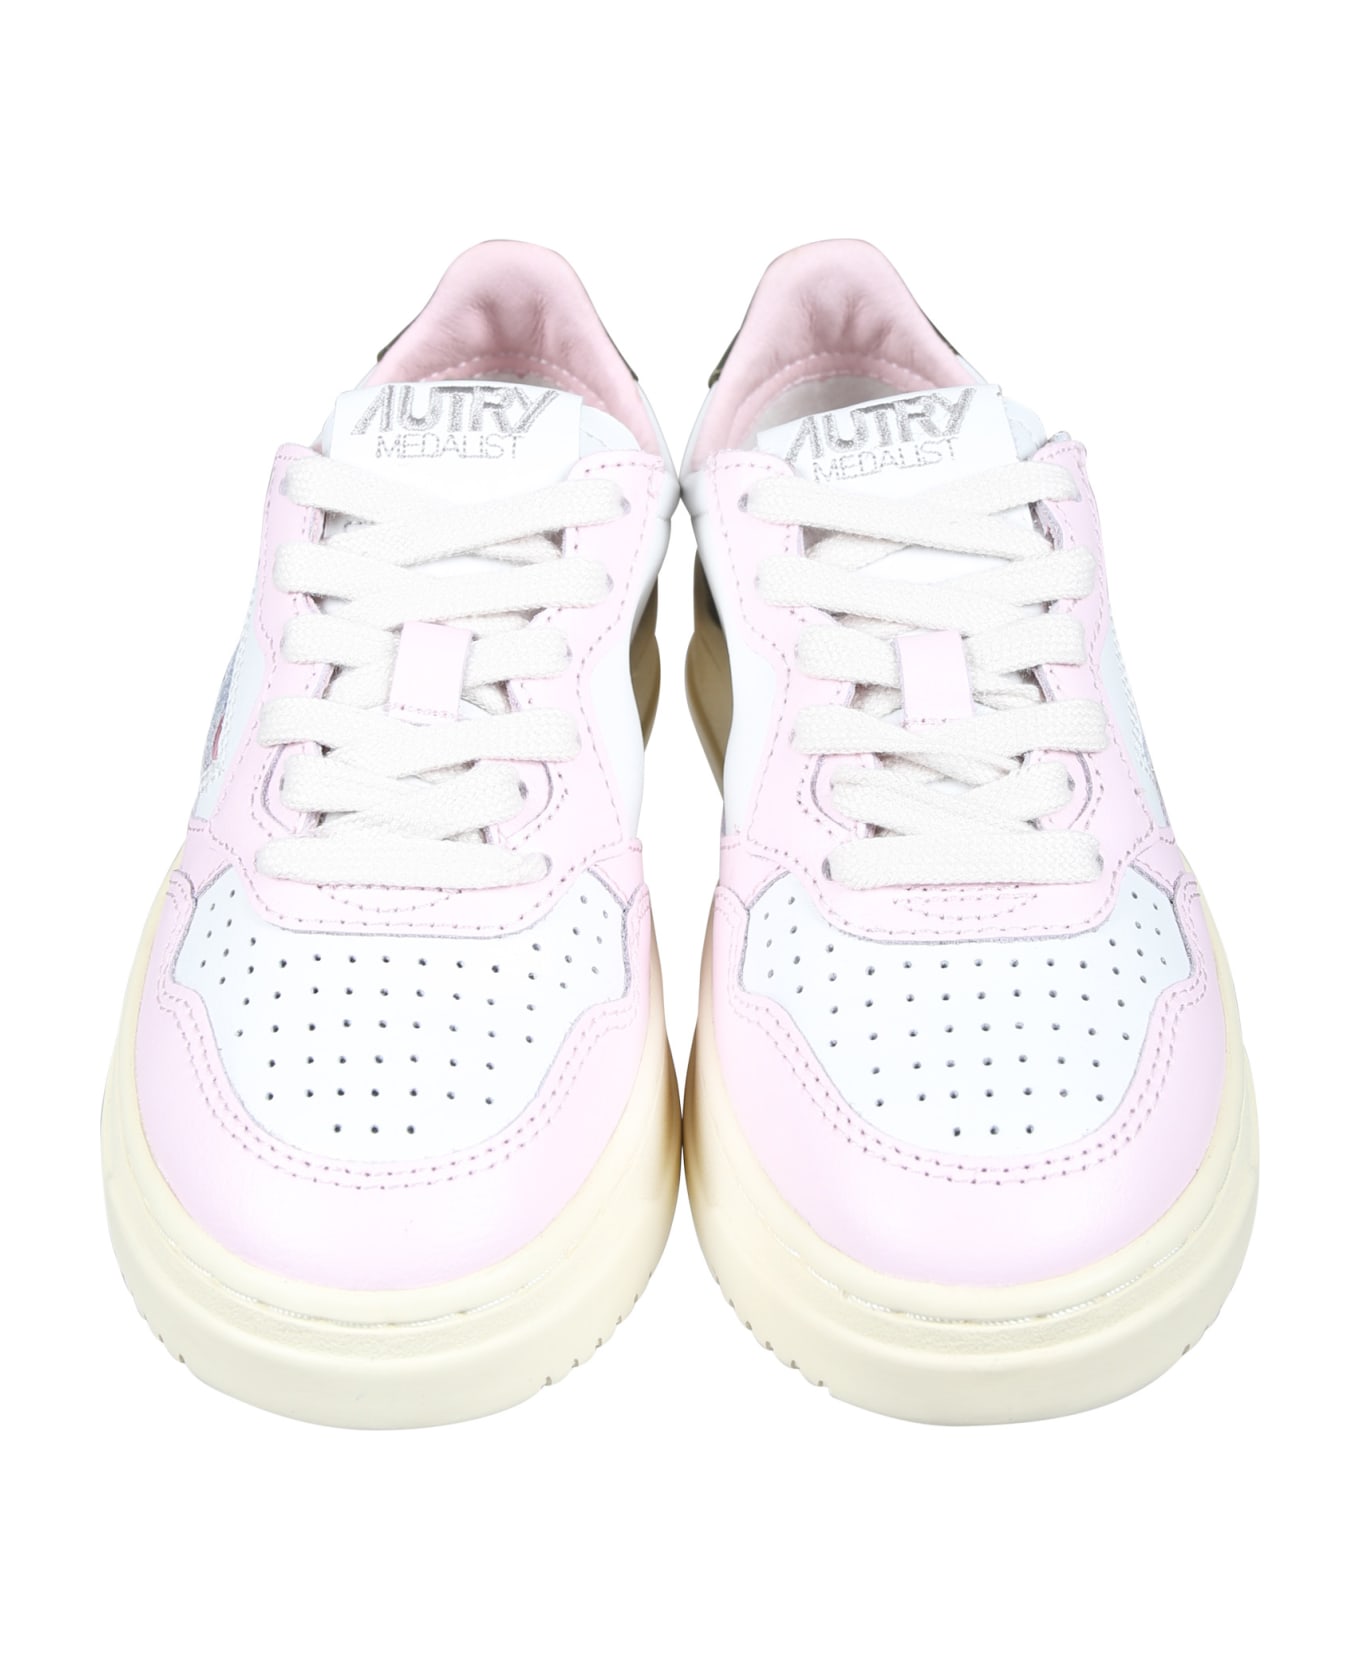 Autry Medalist Low-top Sneakers For Kids - Multicolor